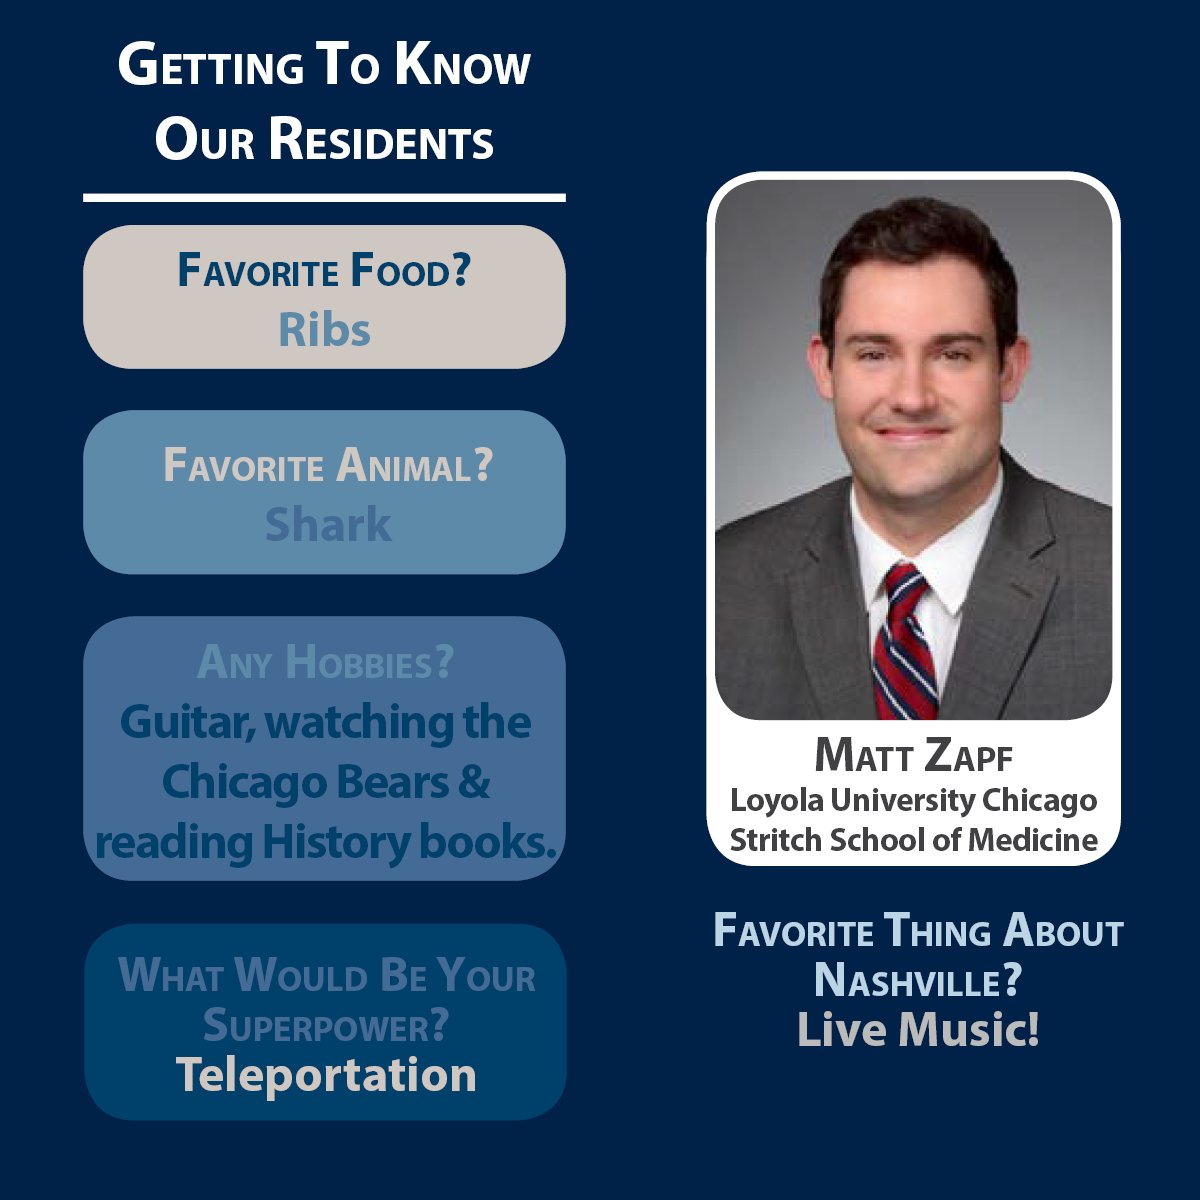 Meet our PGY-1 Class of 2017-2018 Residents. Get to know Dr. Matt Zapf! #meetourresidents #anesthesiaresidents #vumc #anesthesia